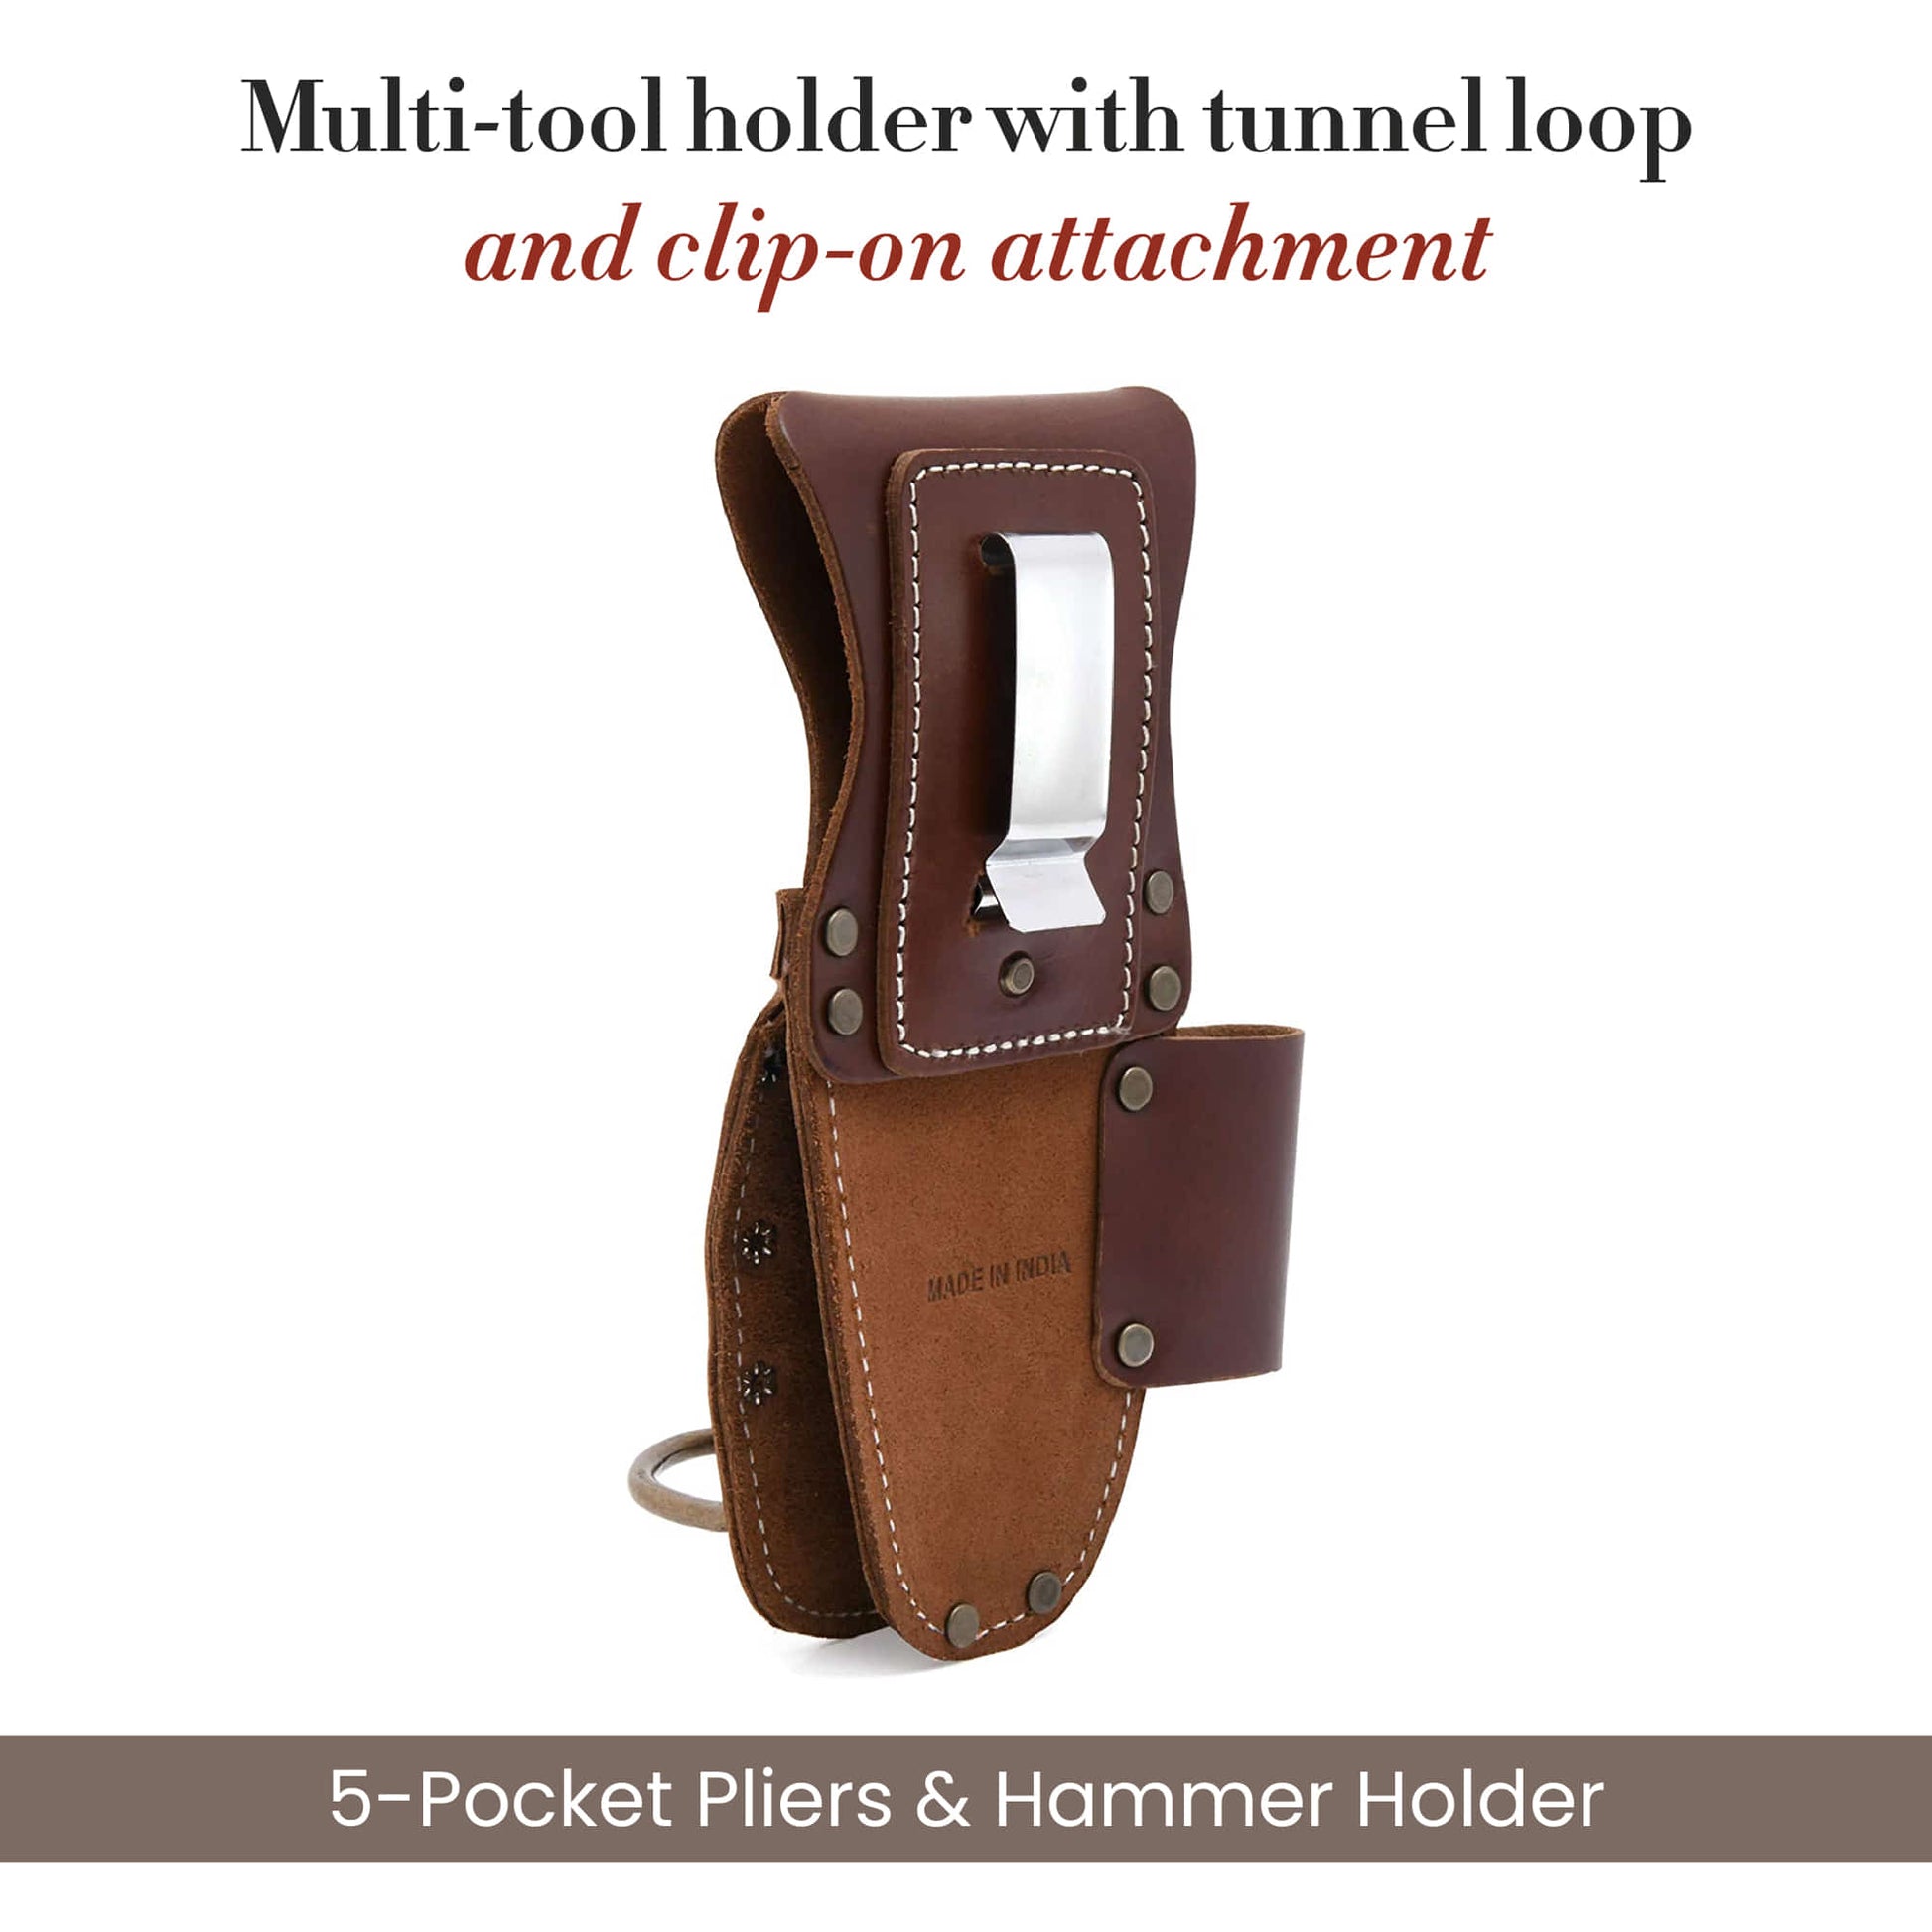 Style n Craft's 98016 - 5 Pocket Pliers, Flashlight & Hammer Holder in Dark Tan Top Grain Leather - Back View Showing the Details of the Metal Clip-On Attachment & Tunnel Loop Attachment for a Belt of Up to 3-Inch Width